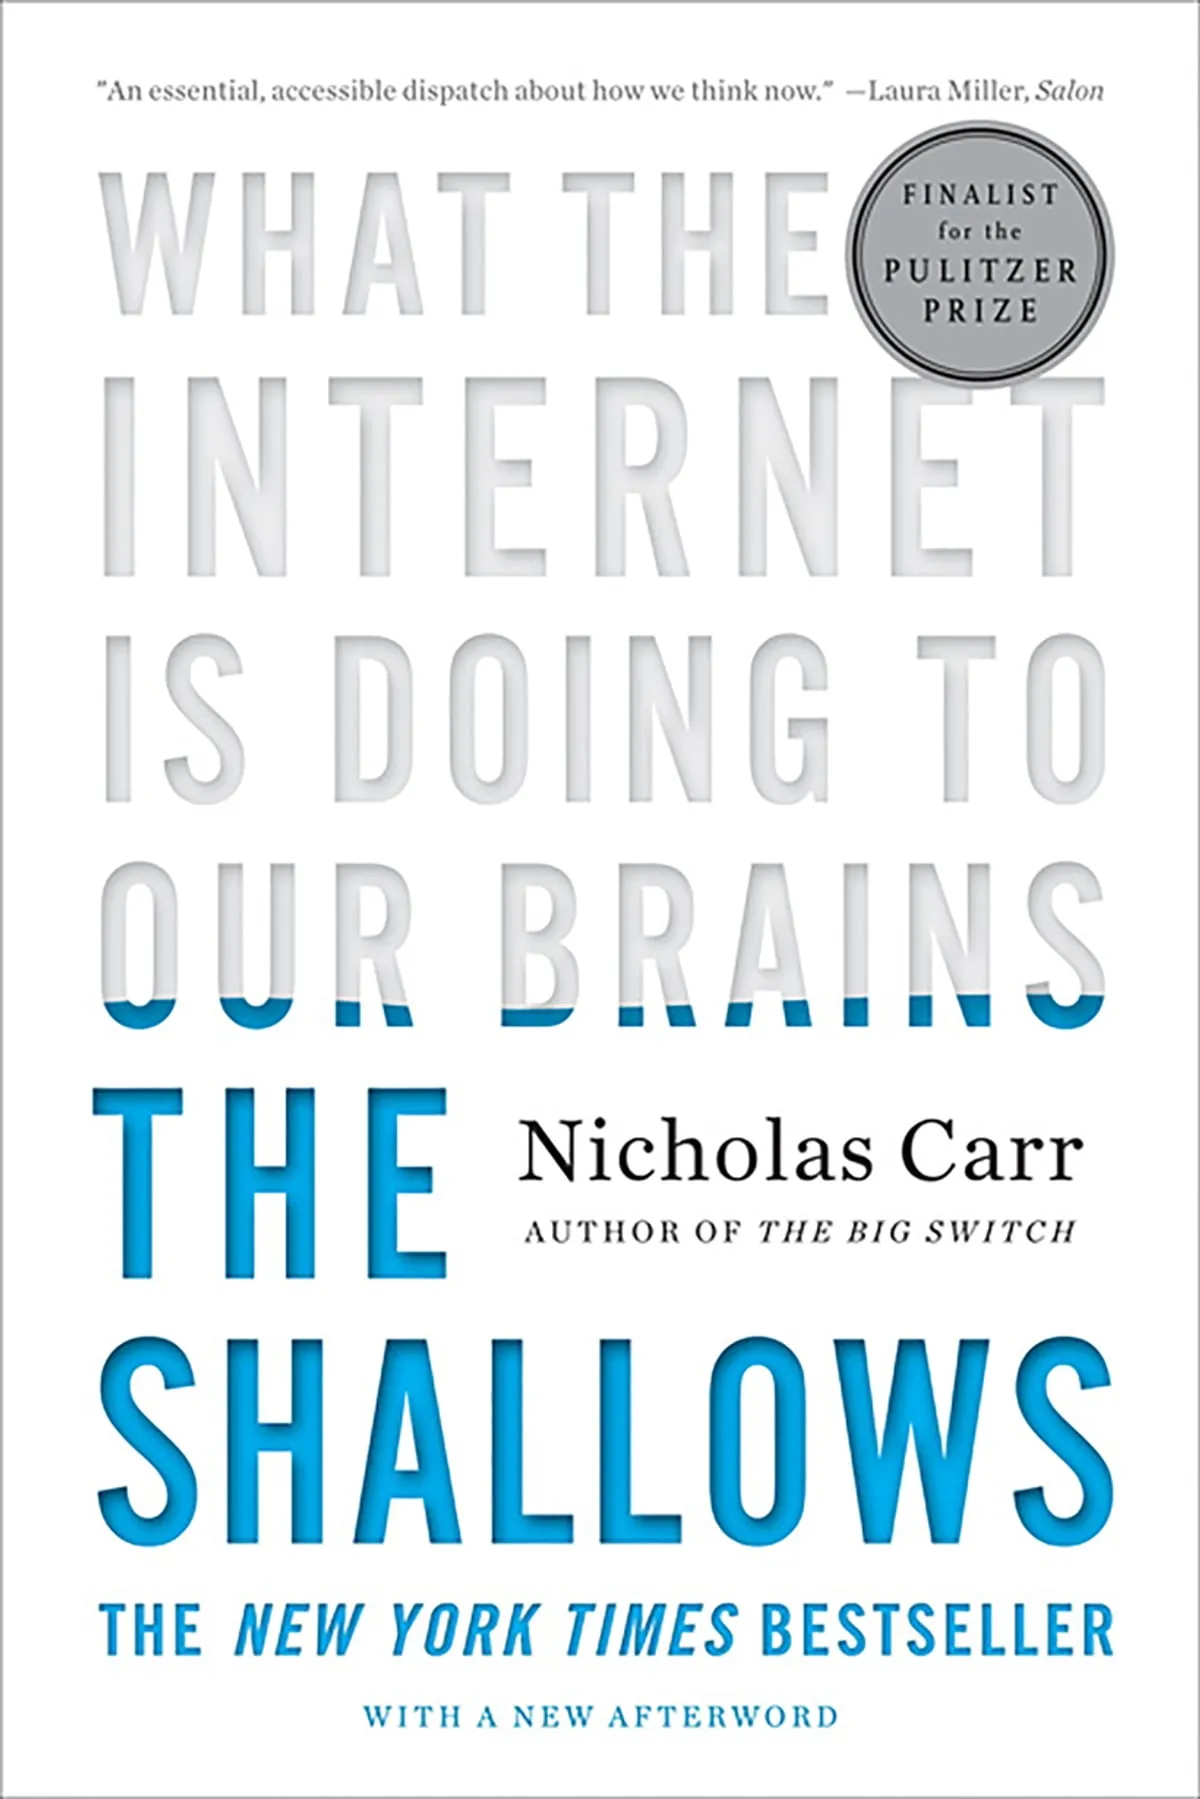 Cover of the book title The Shallows